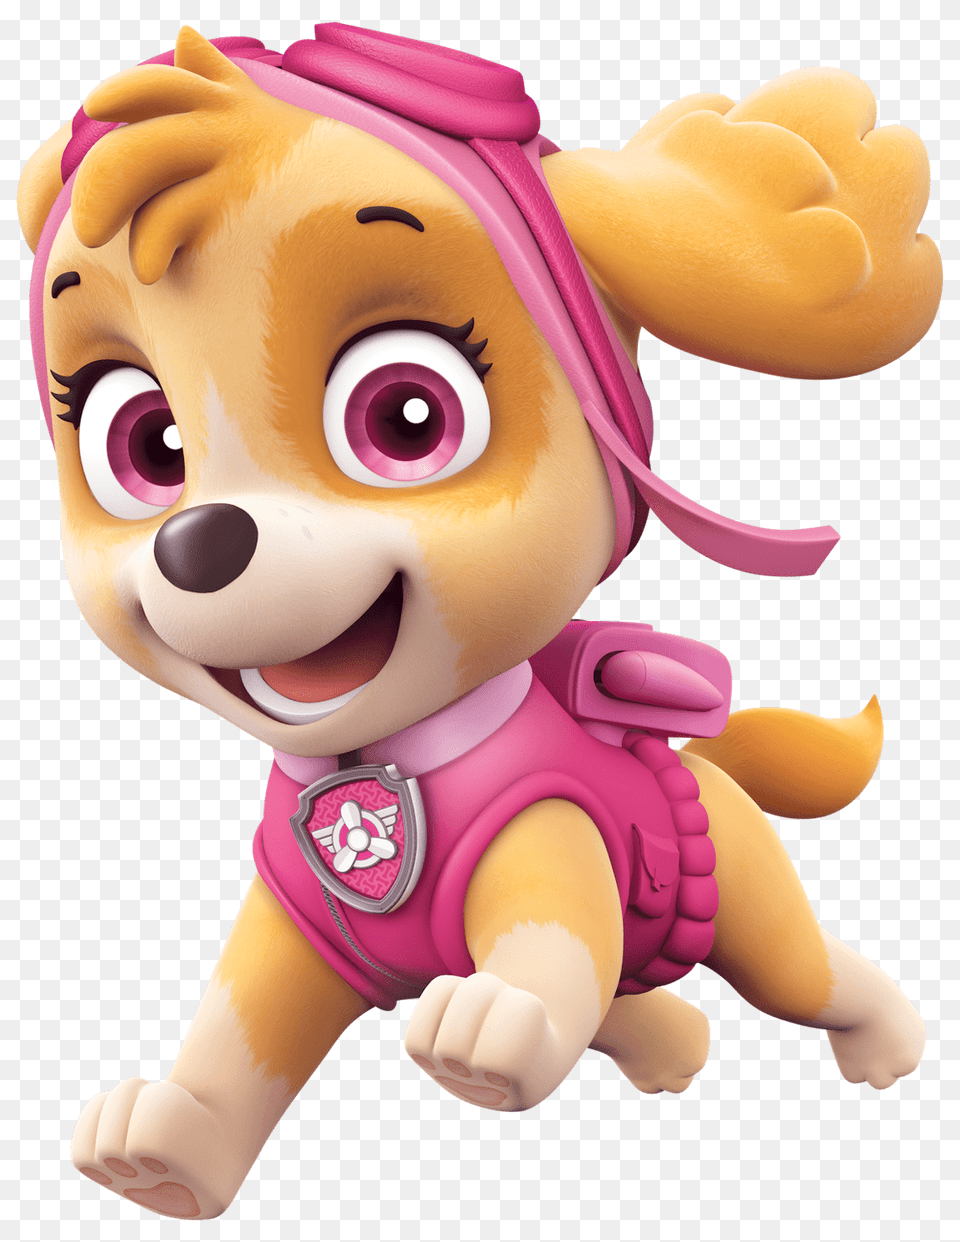 Patrulha Canina, Toy, Plush, Doll Free Png Download